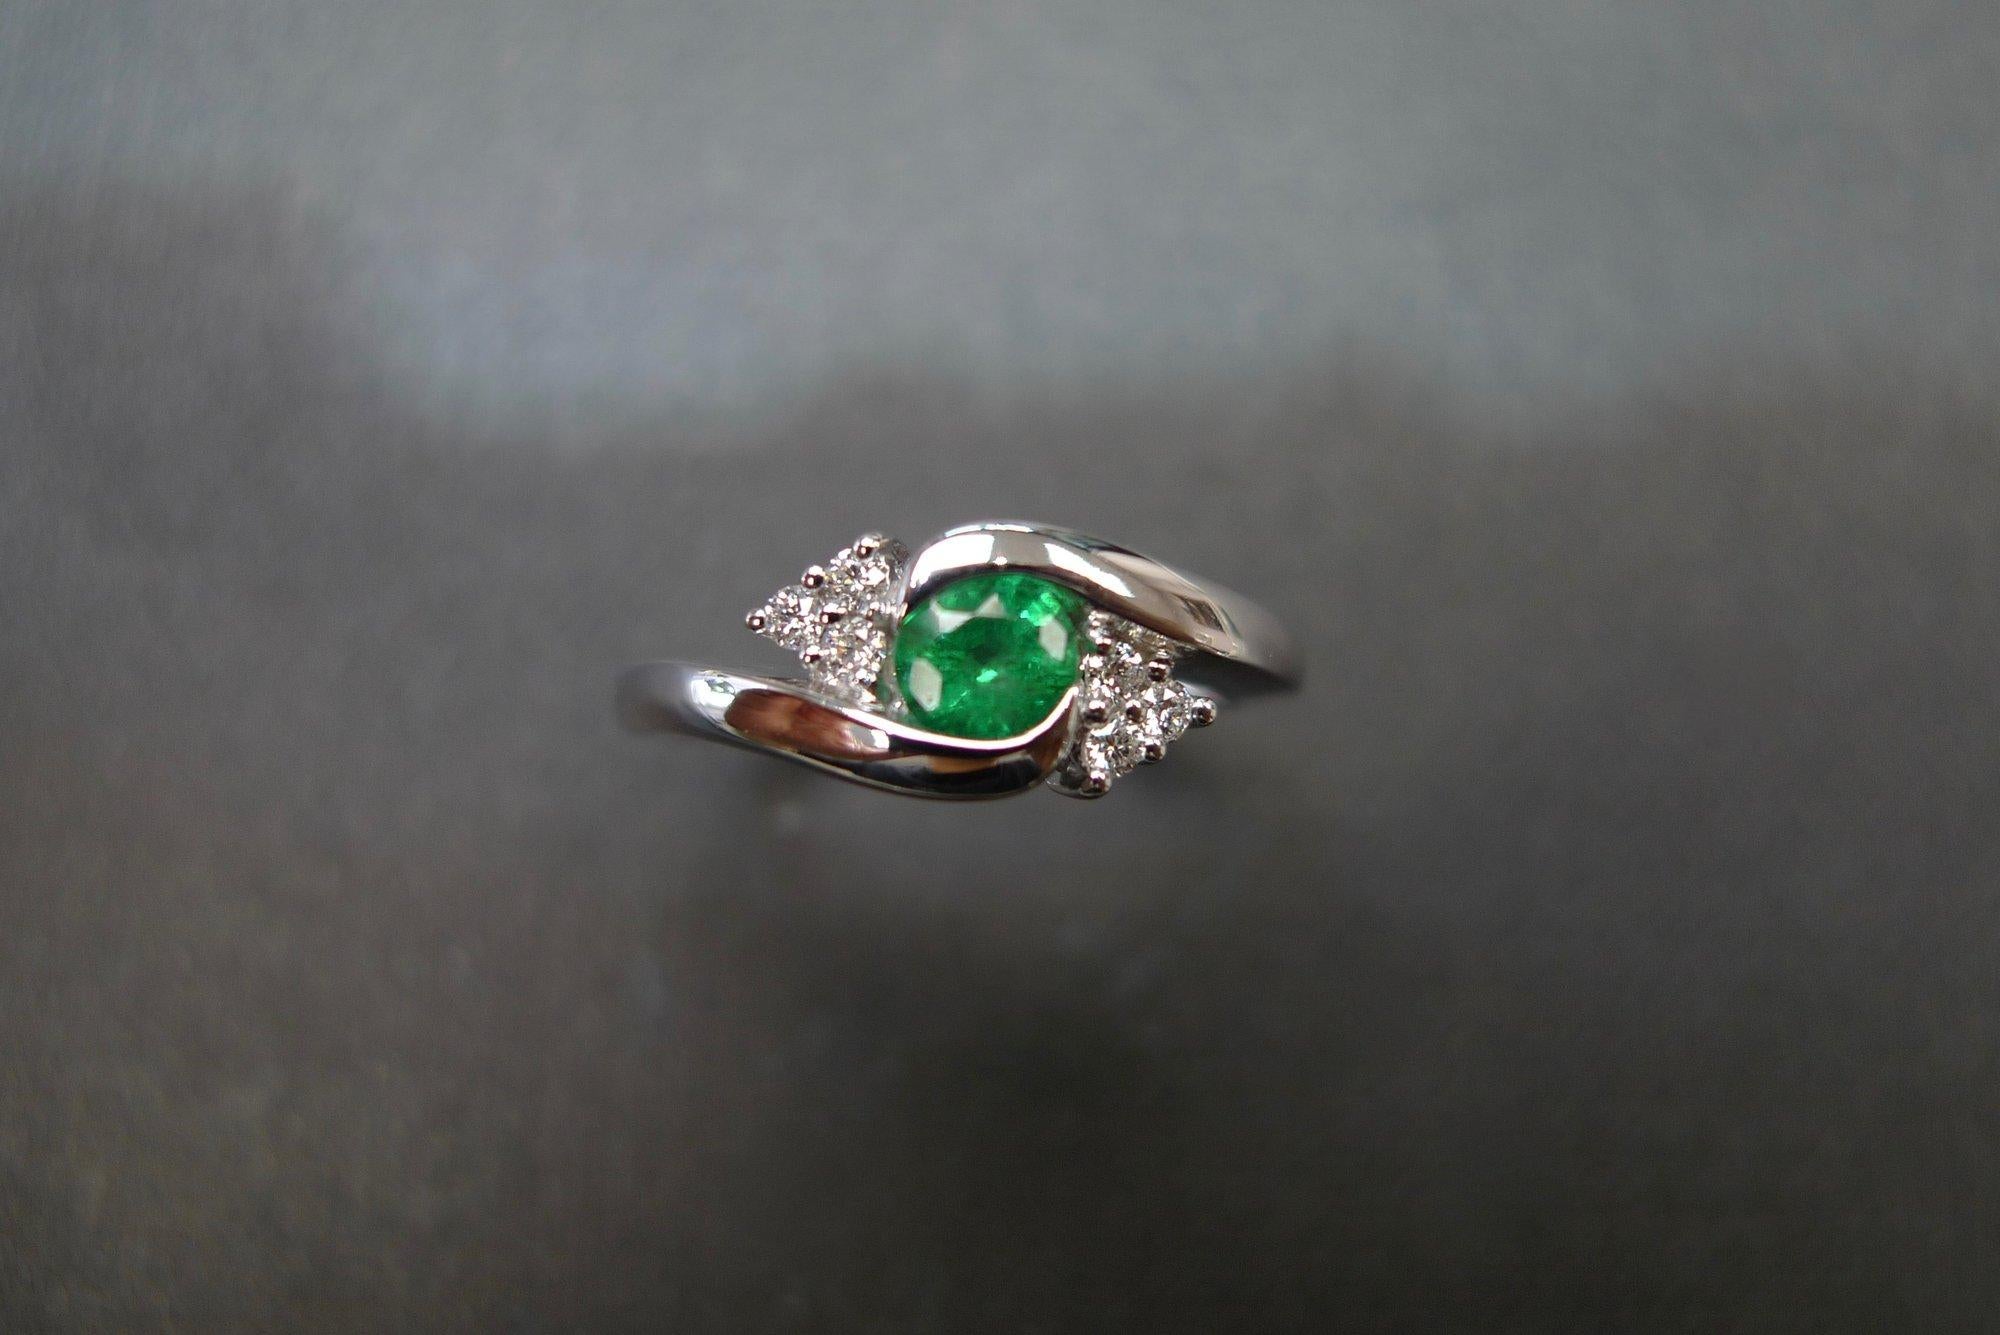 For Sale:  Tension Twist Round Cut Emerald and Diamond Engagement Ring in 18K White Gold 6